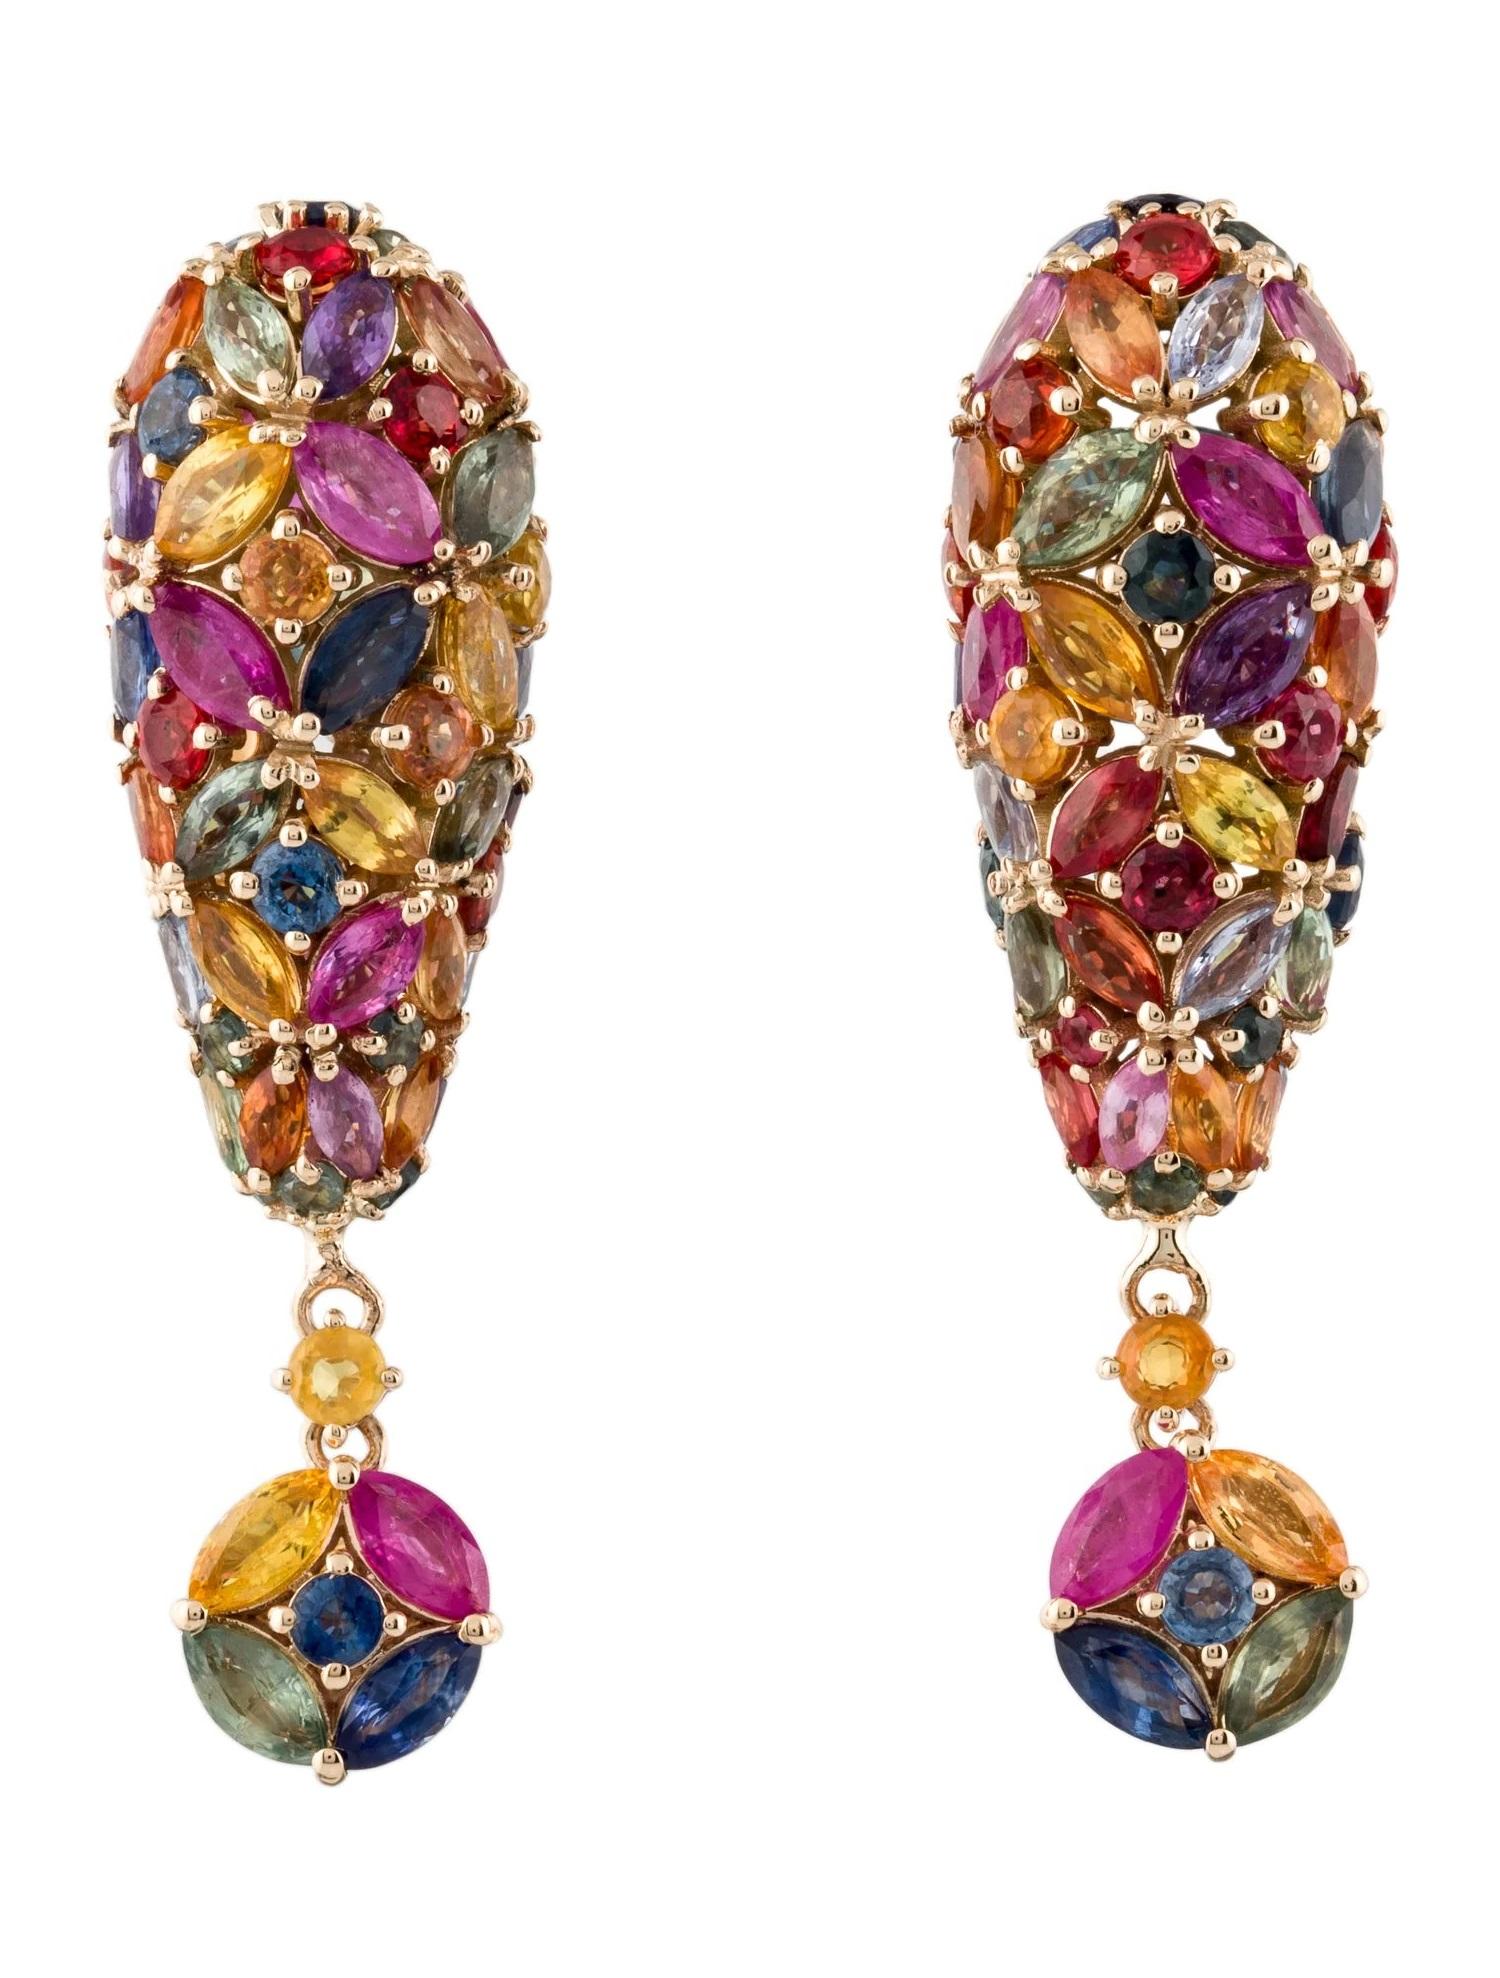 Marquise Cut 14K Ruby & Sapphire Drop Earrings  29.63 Carat Marquise & Round Gemstones  Exq For Sale